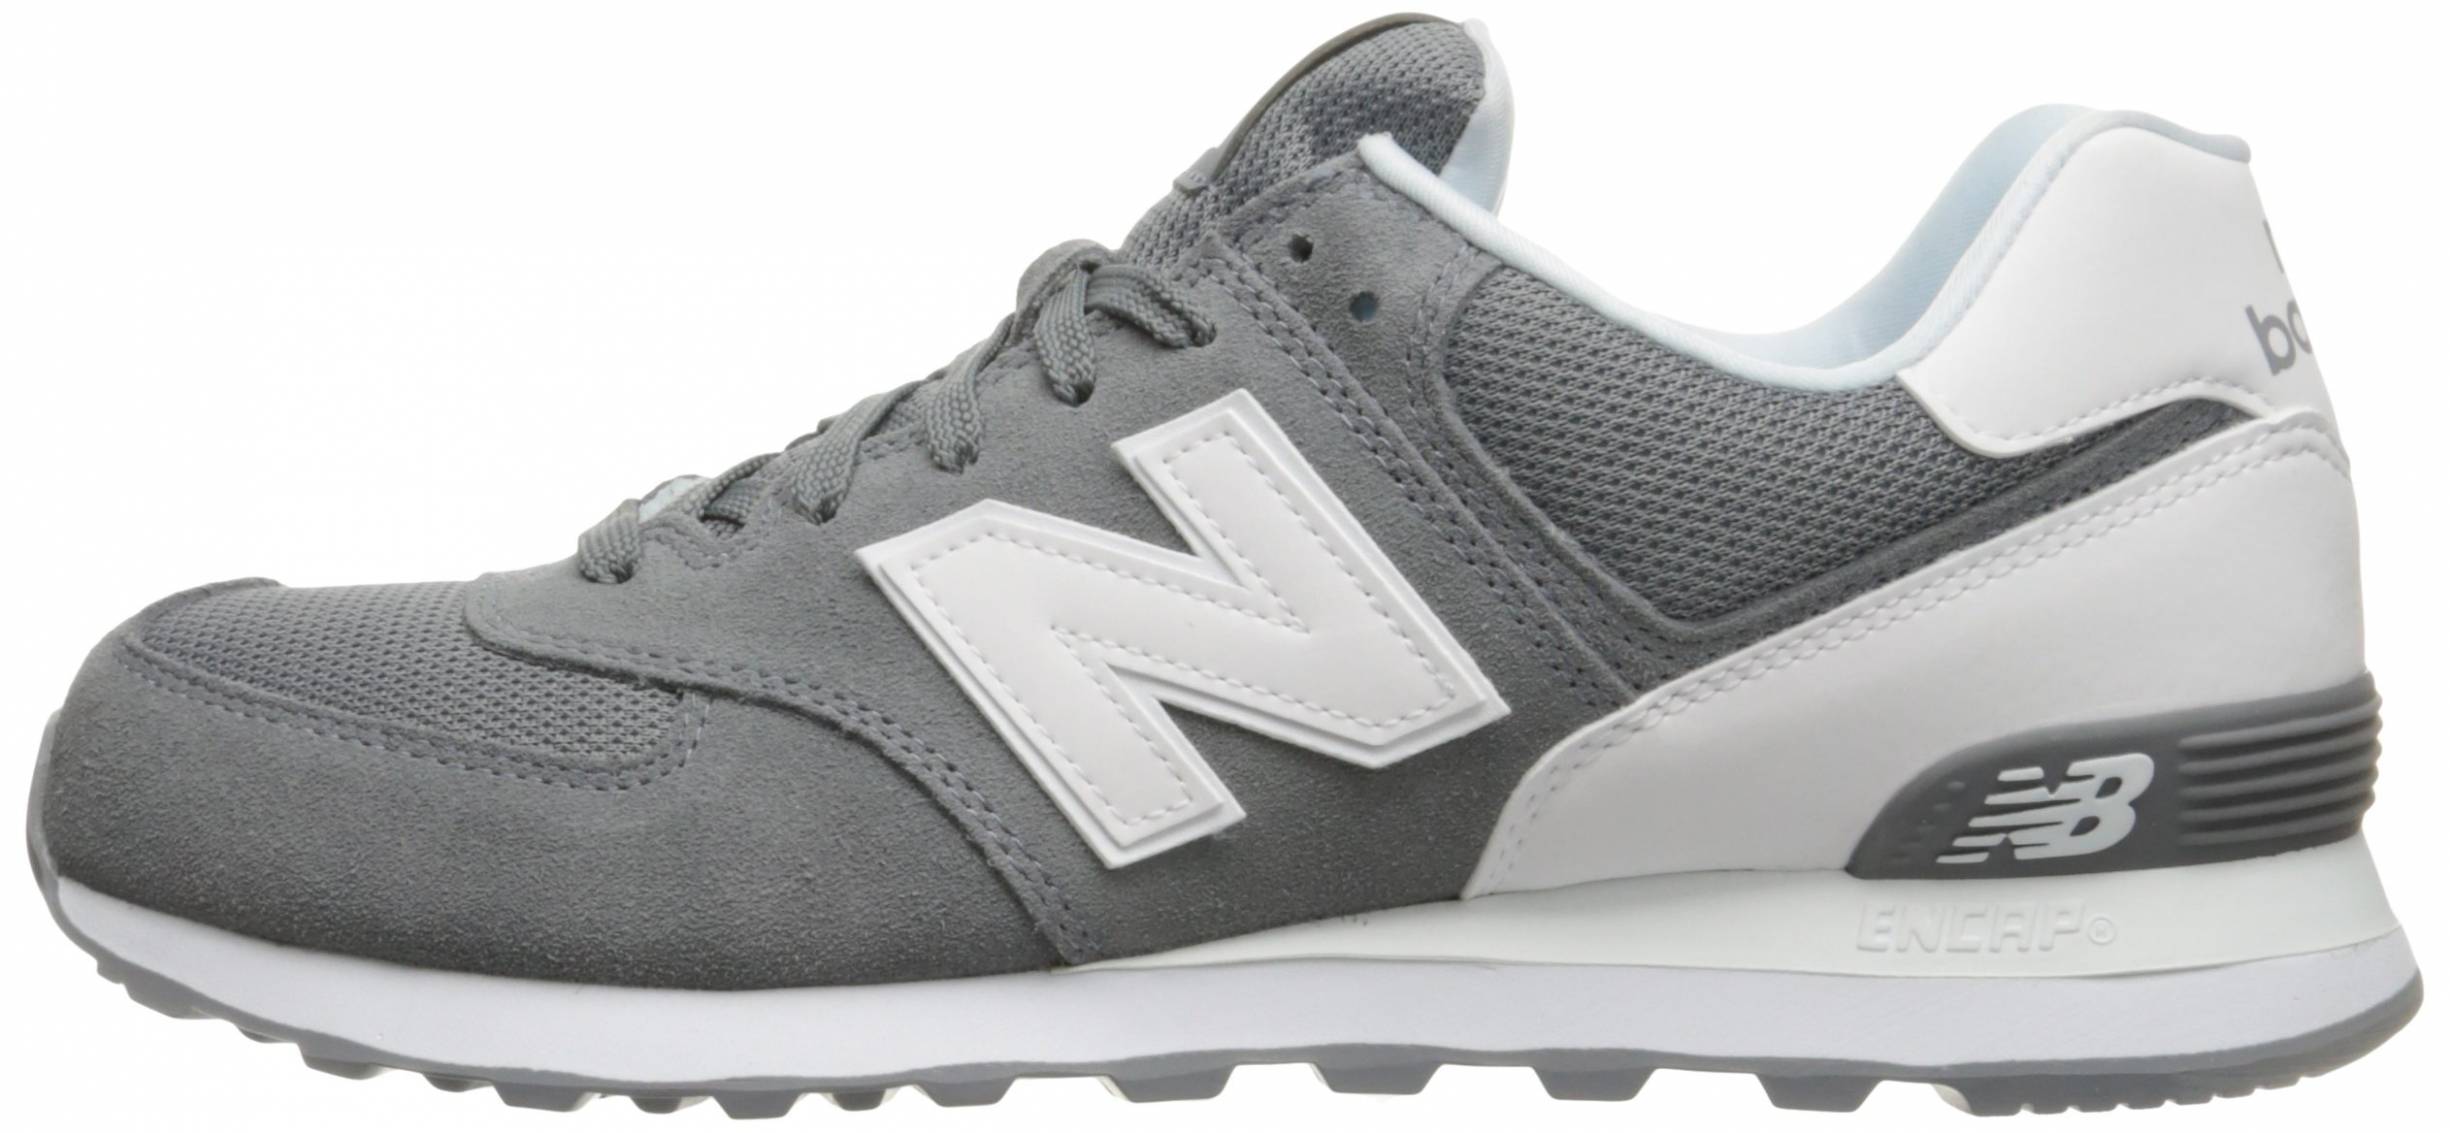 13 Reasons to/NOT to Buy New Balance 574 Reflective (Oct 2021 ...